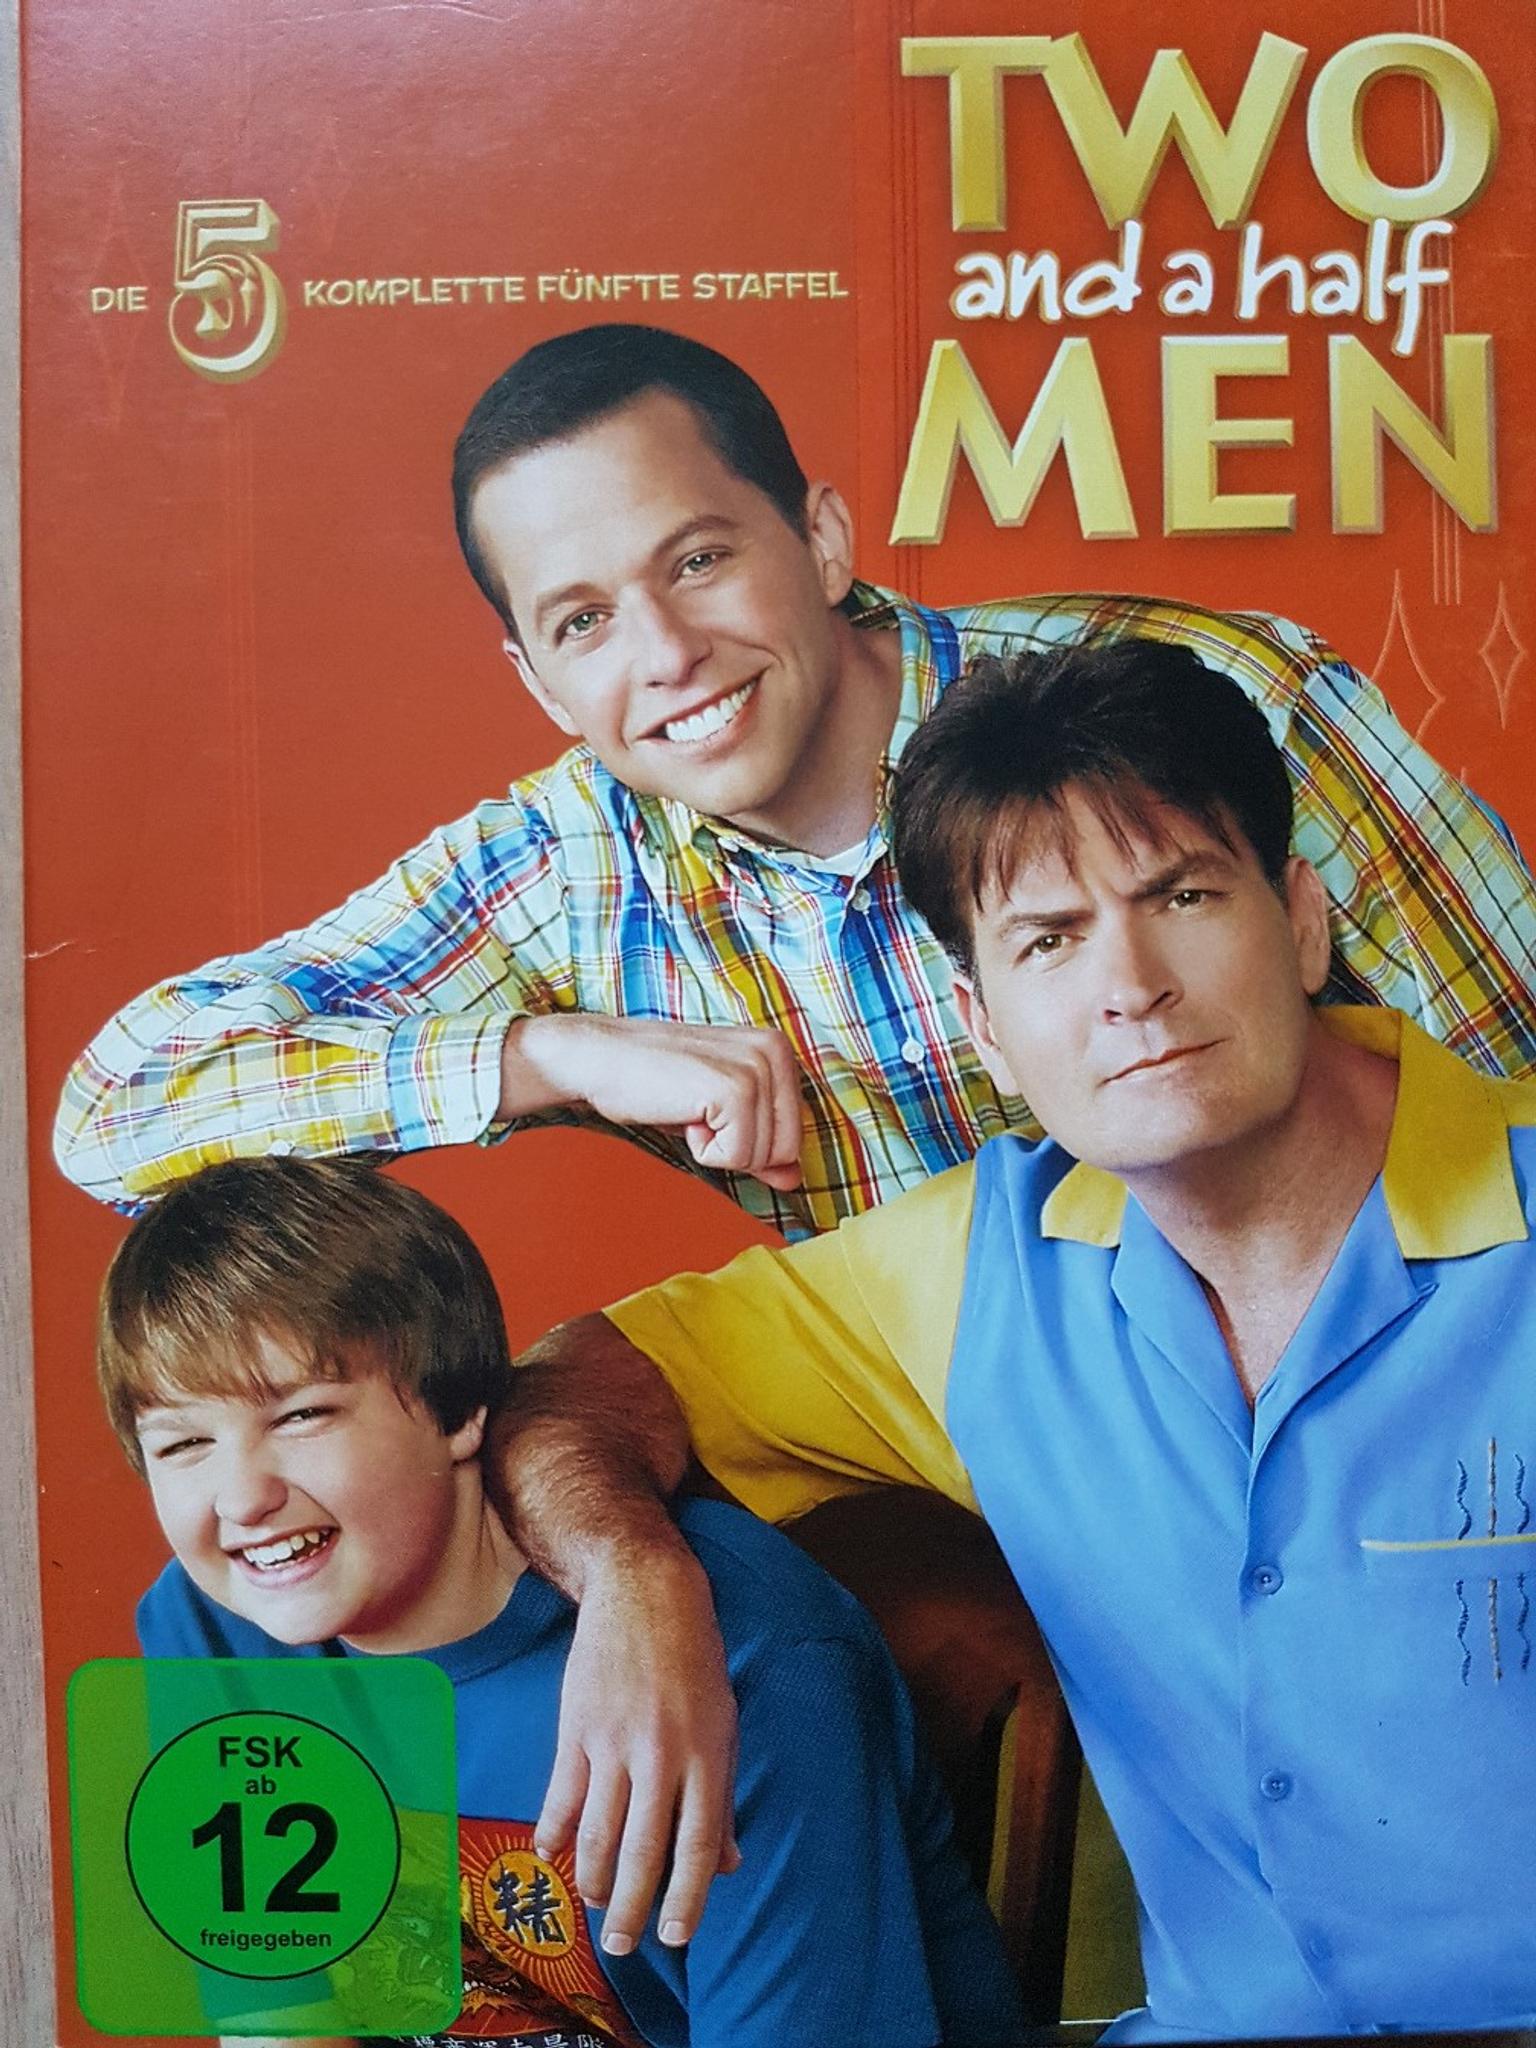 Two And A Half Men Komplette 5 Staffel In 65205 Wiesbaden For 6 00 For Sale Shpock